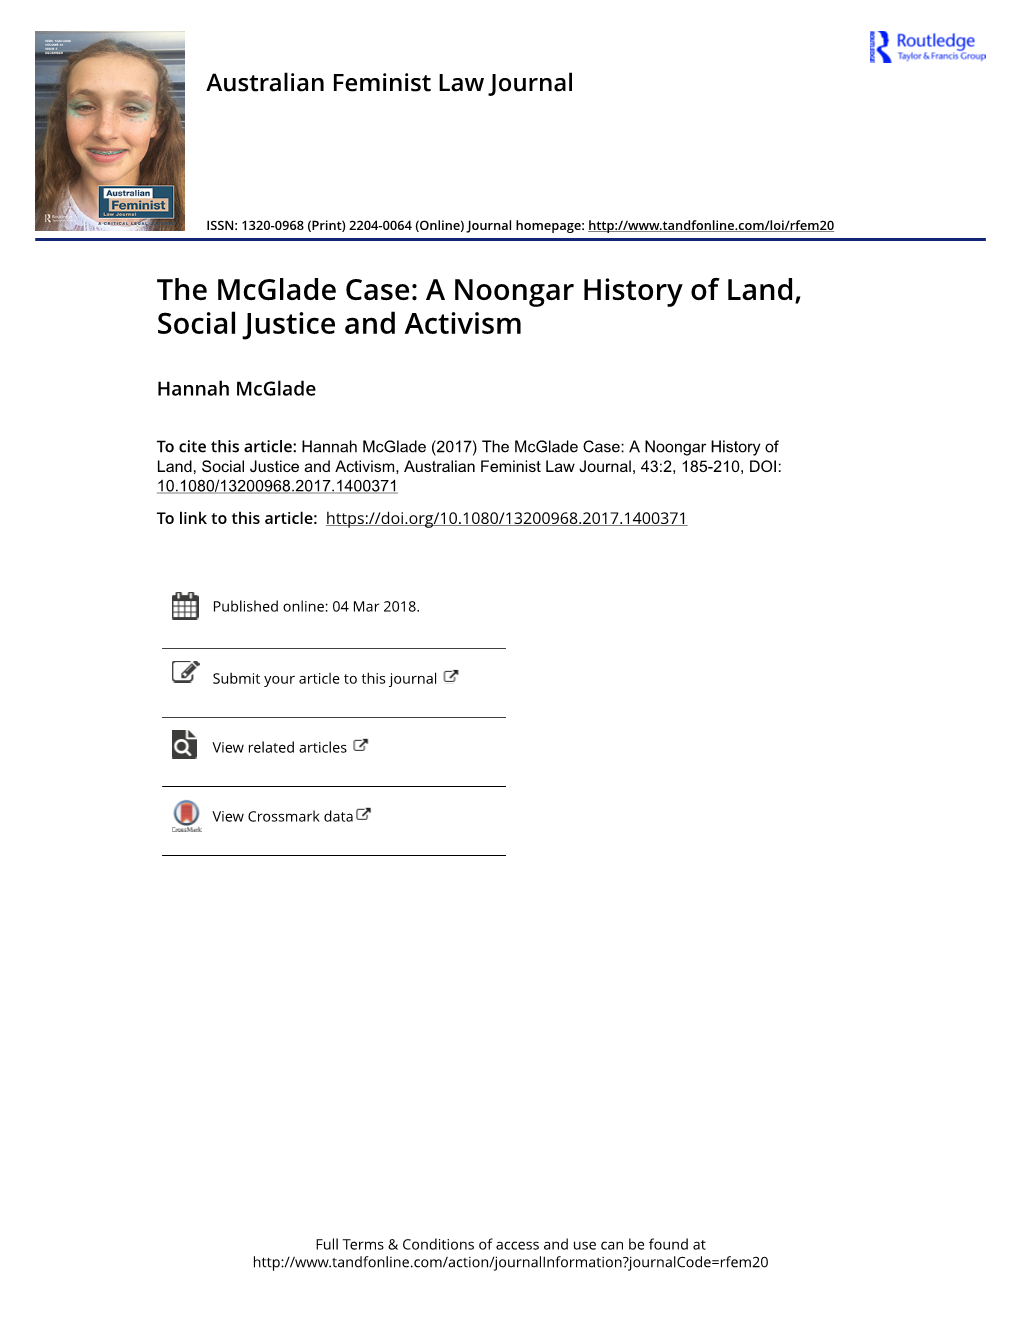 The Mcglade Case: a Noongar History of Land, Social Justice and Activism